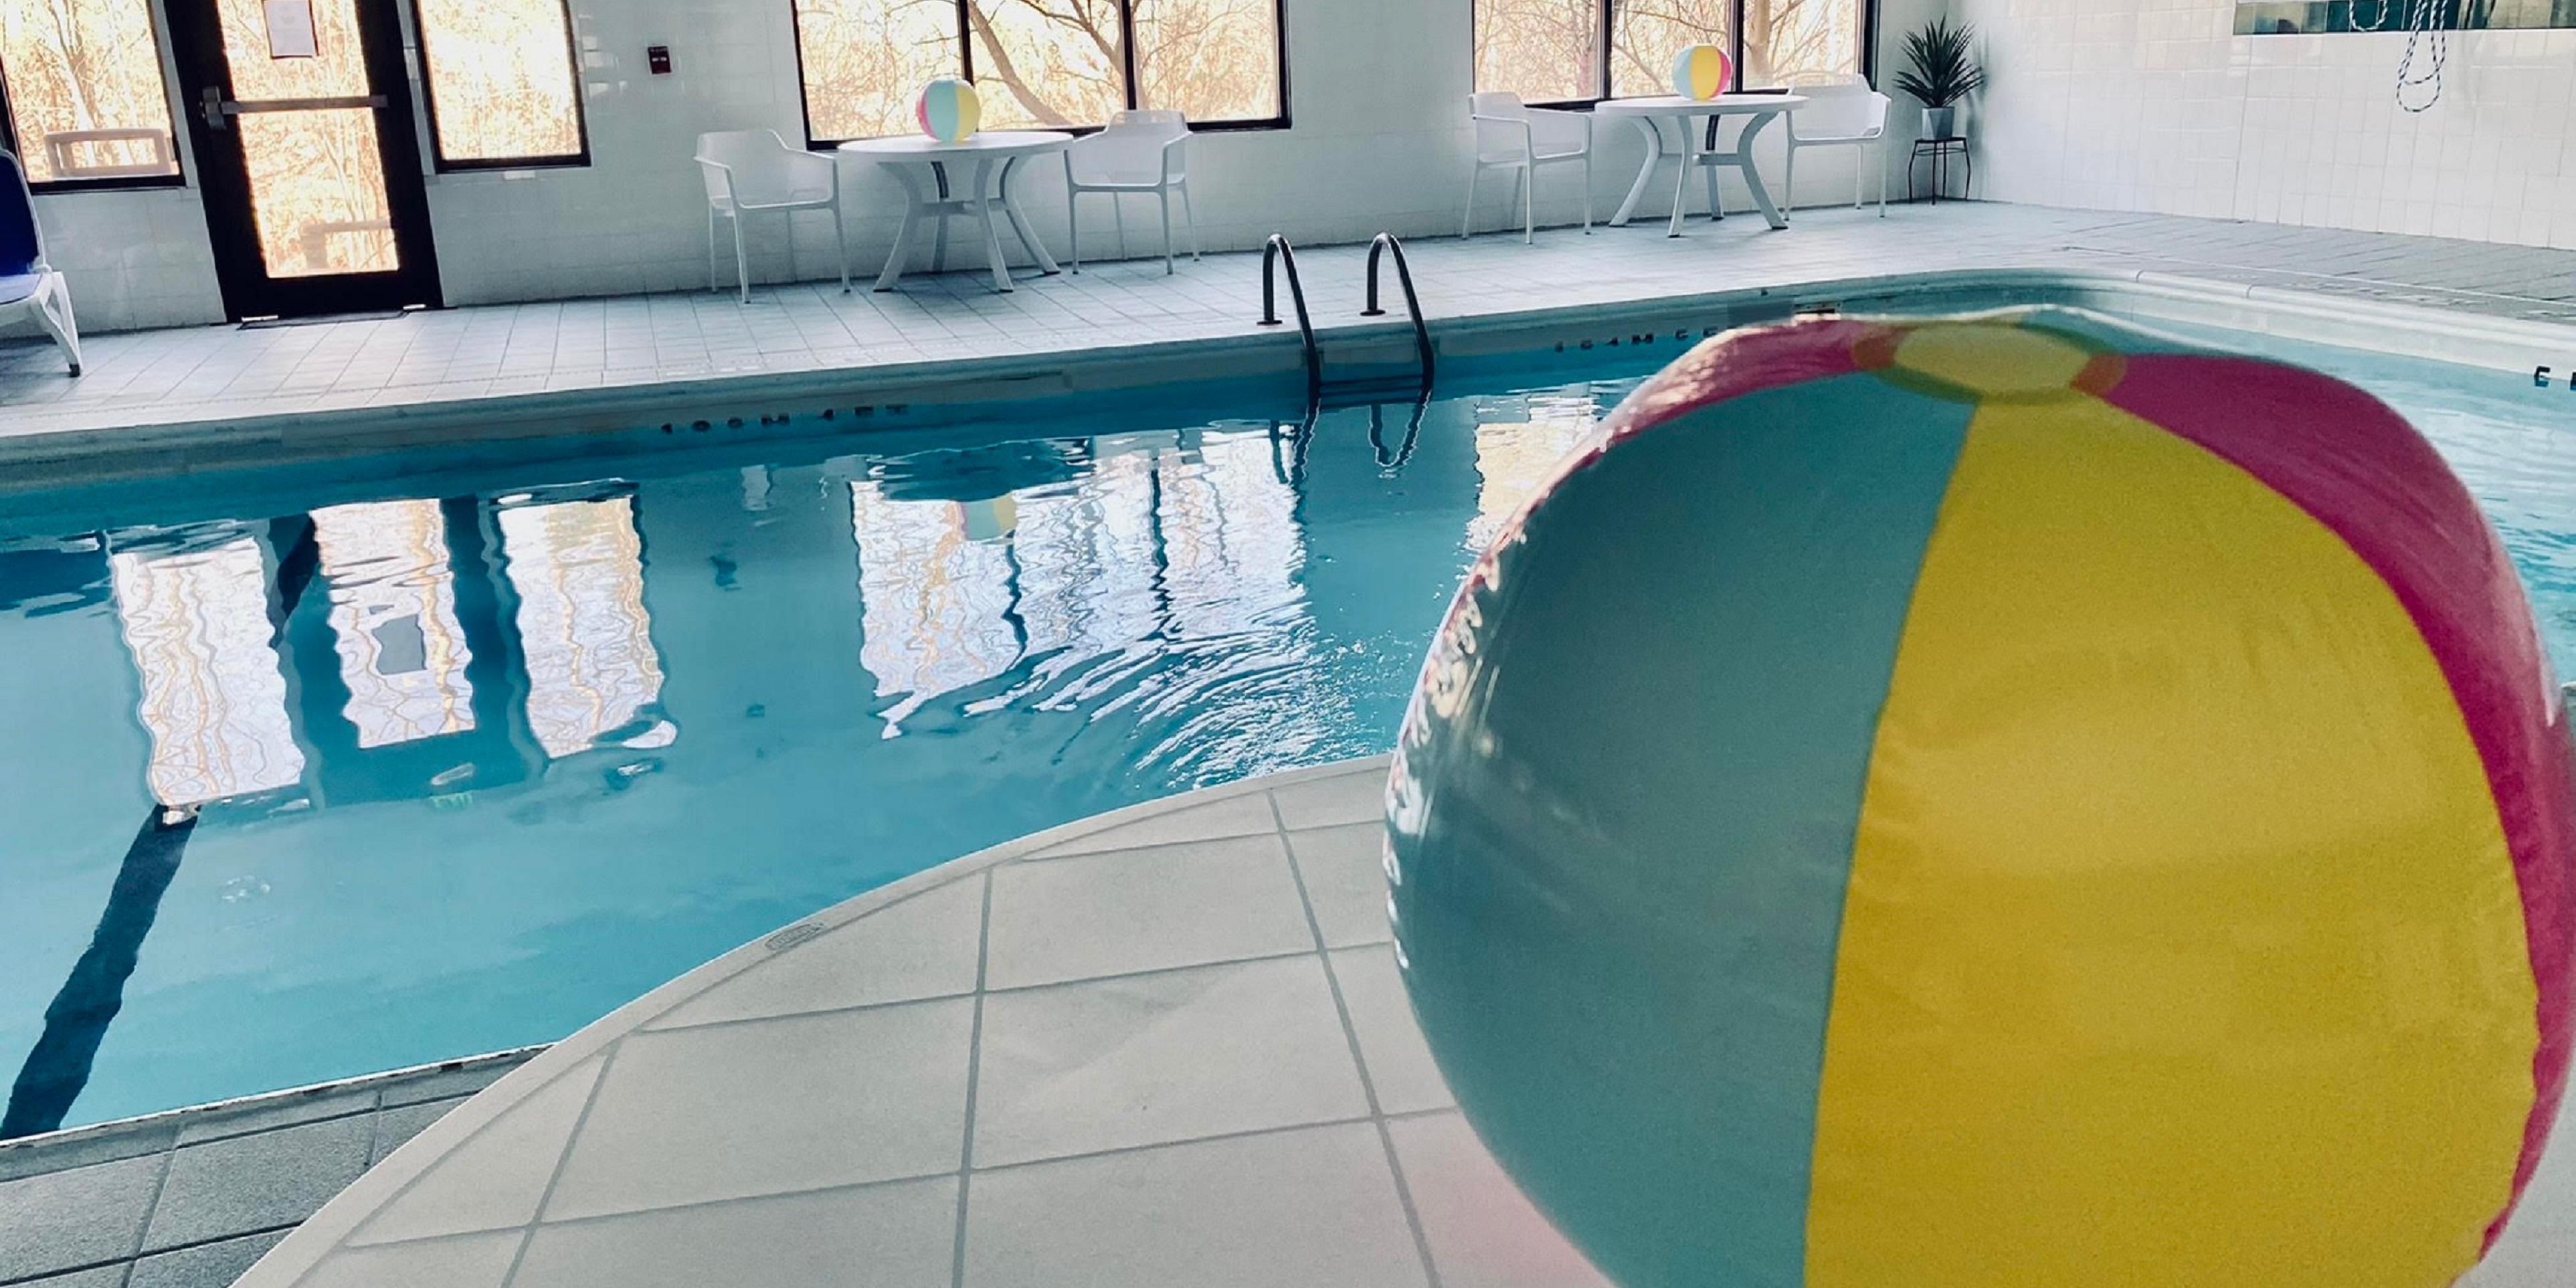 Take the kids swimming in our Indoor Heated pool! It is open from 10am-10pm every day of the week!